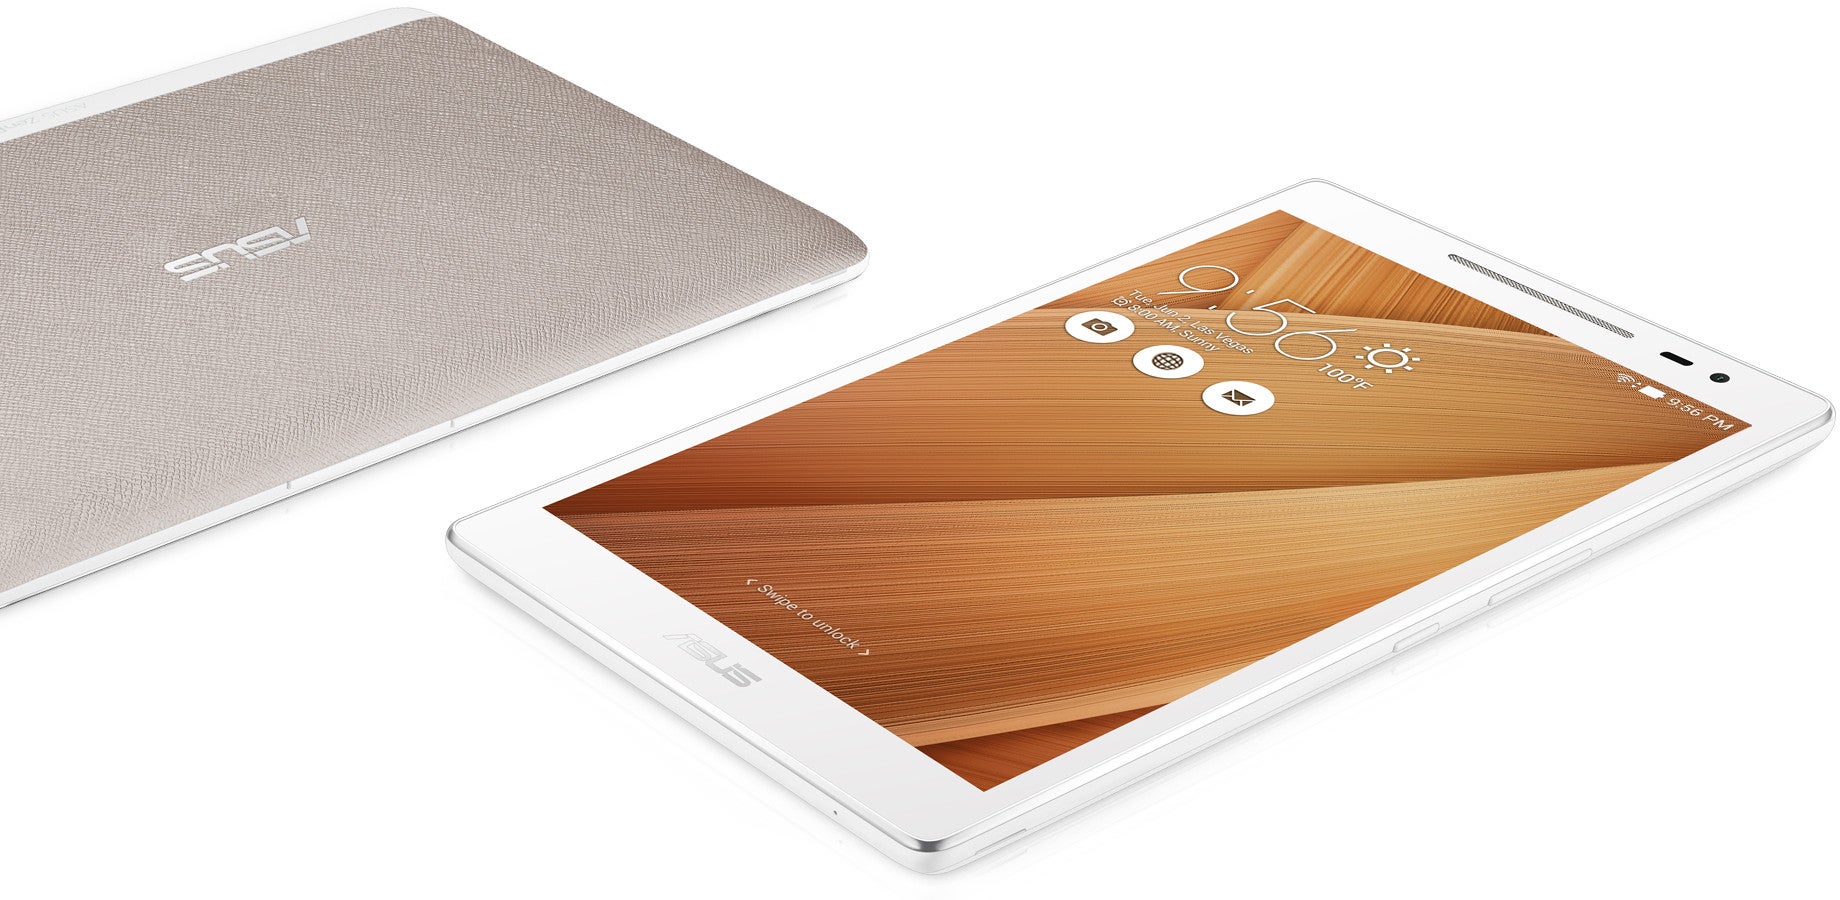 Asus ZenPad 8.0 is now being updated to Android 7.0 Nougat